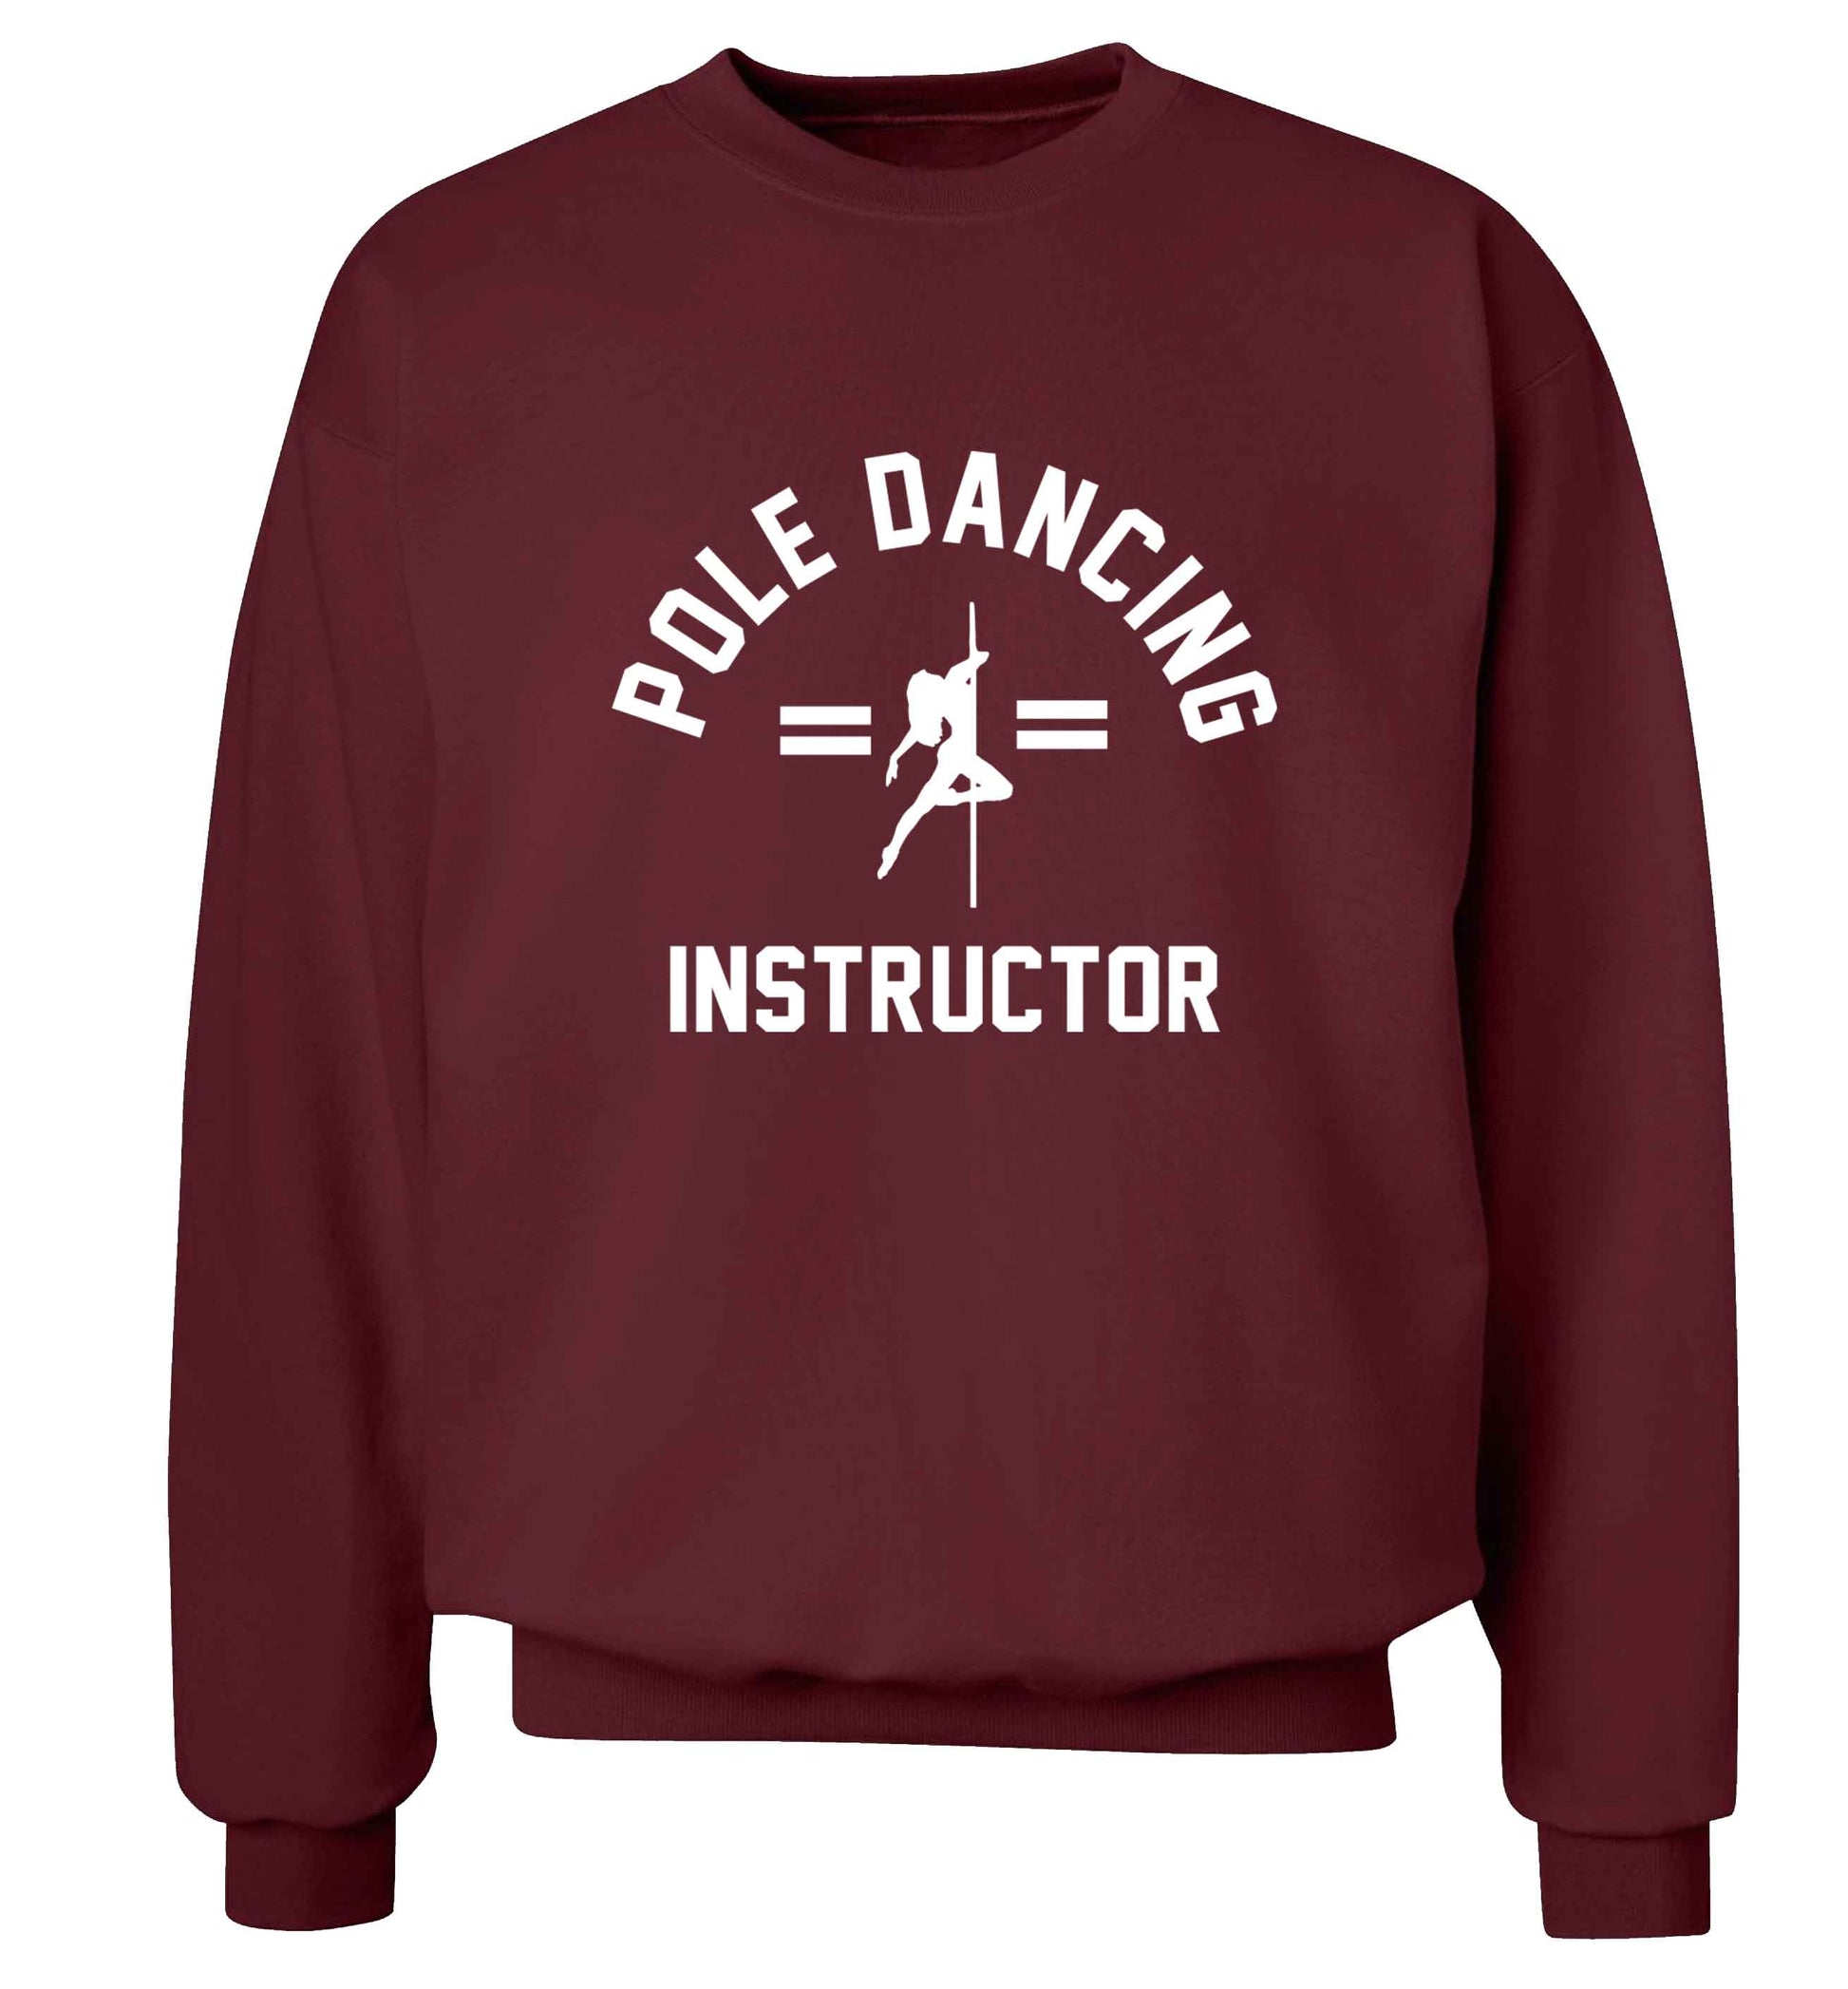 Pole dancing instructor adult's unisex maroon sweater 2XL